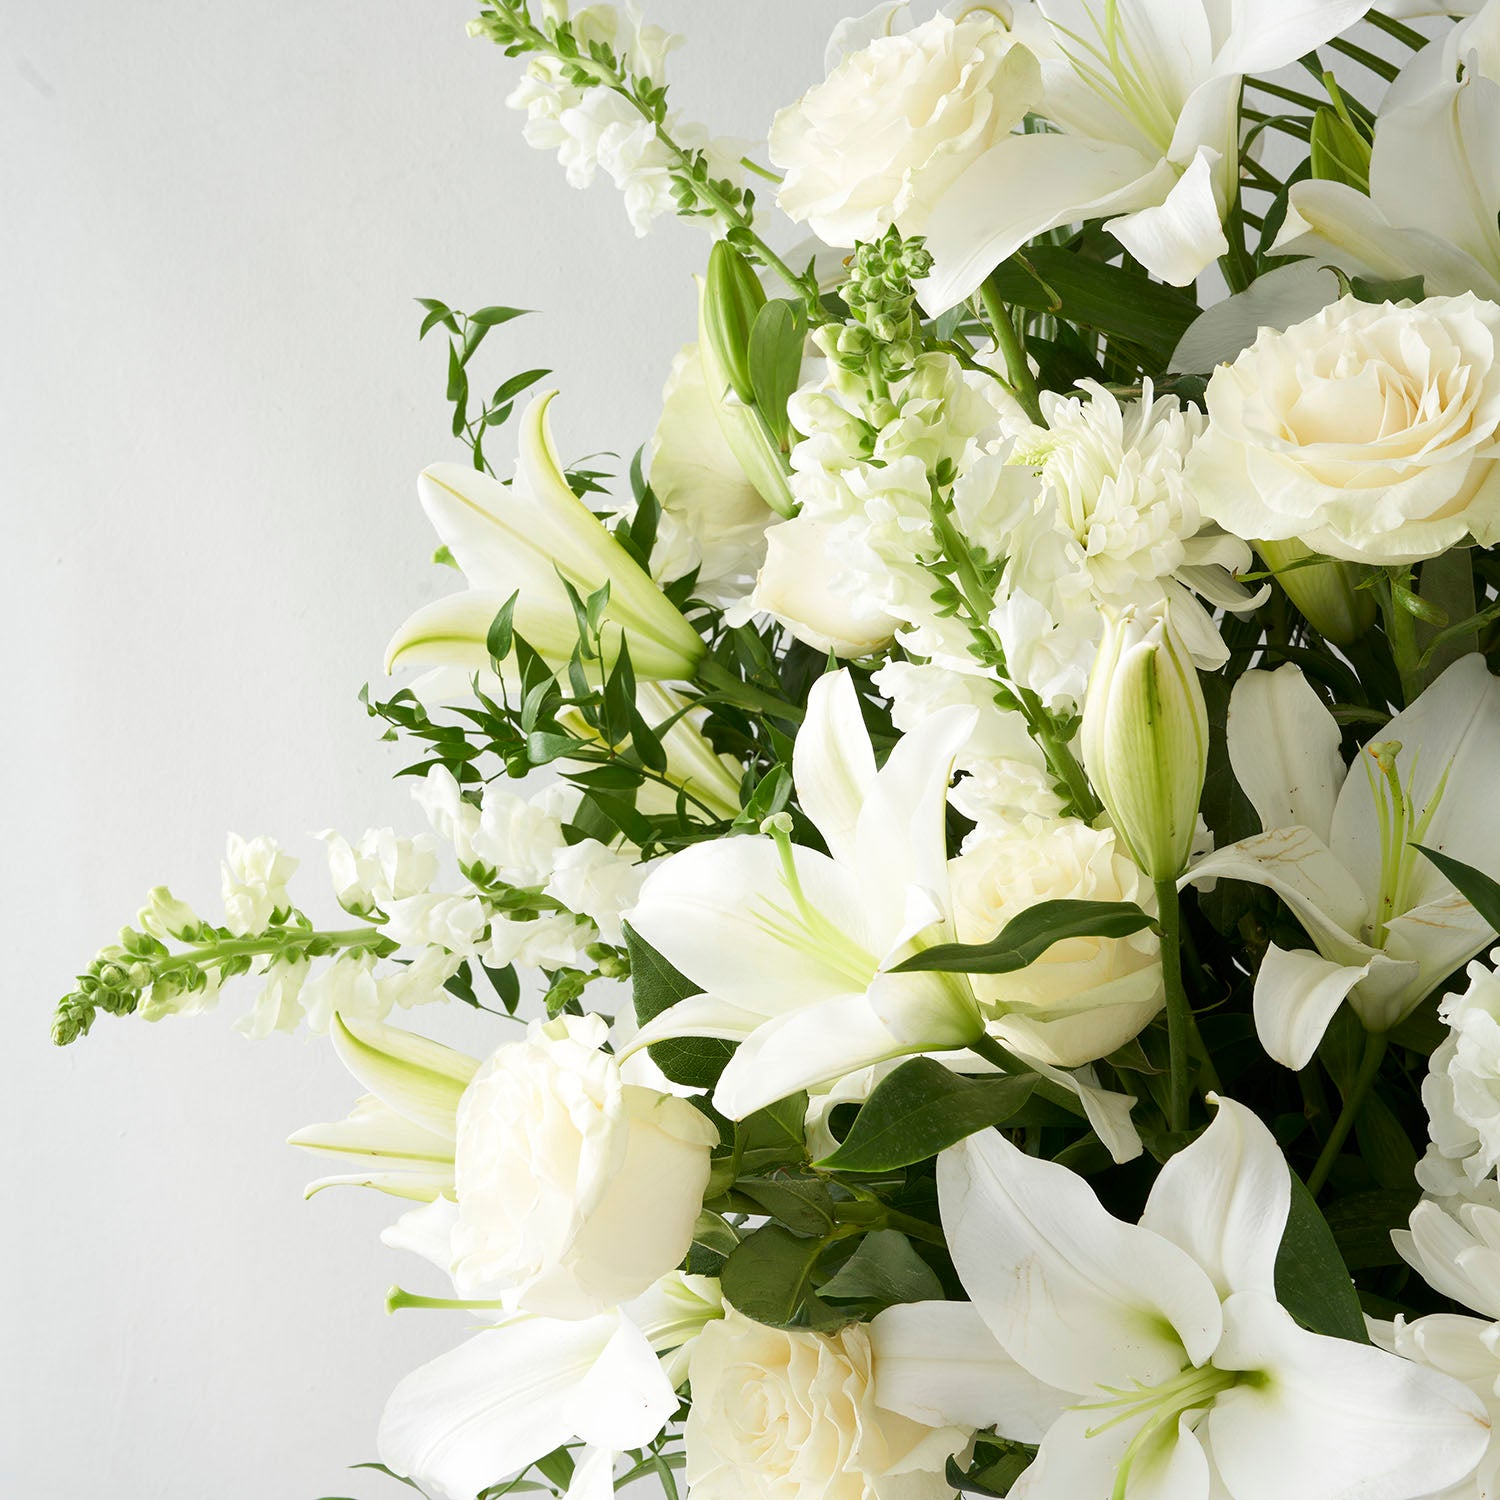 Closeup of white flowers including snapdragons, lilies, and roses.